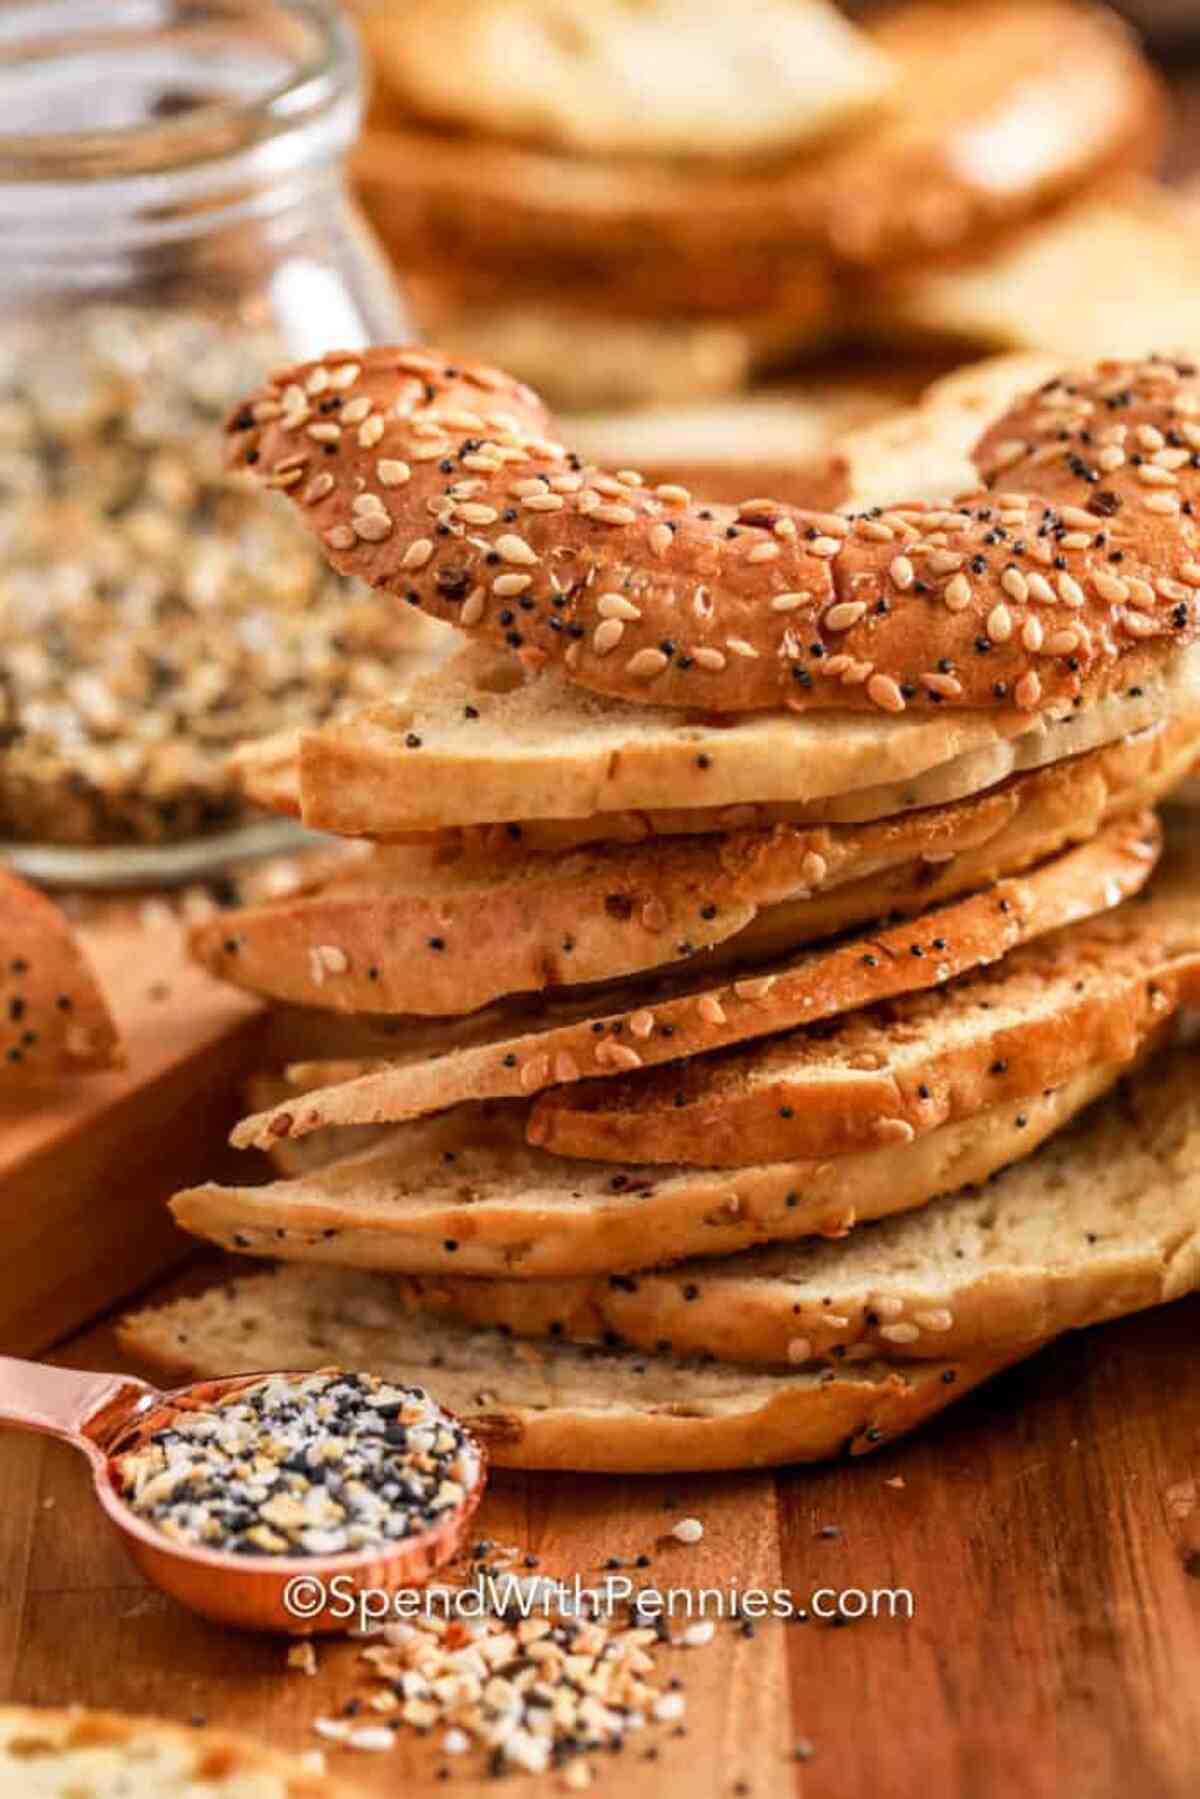 A stack of bagels with sesame seeds on a wooden cutting board.